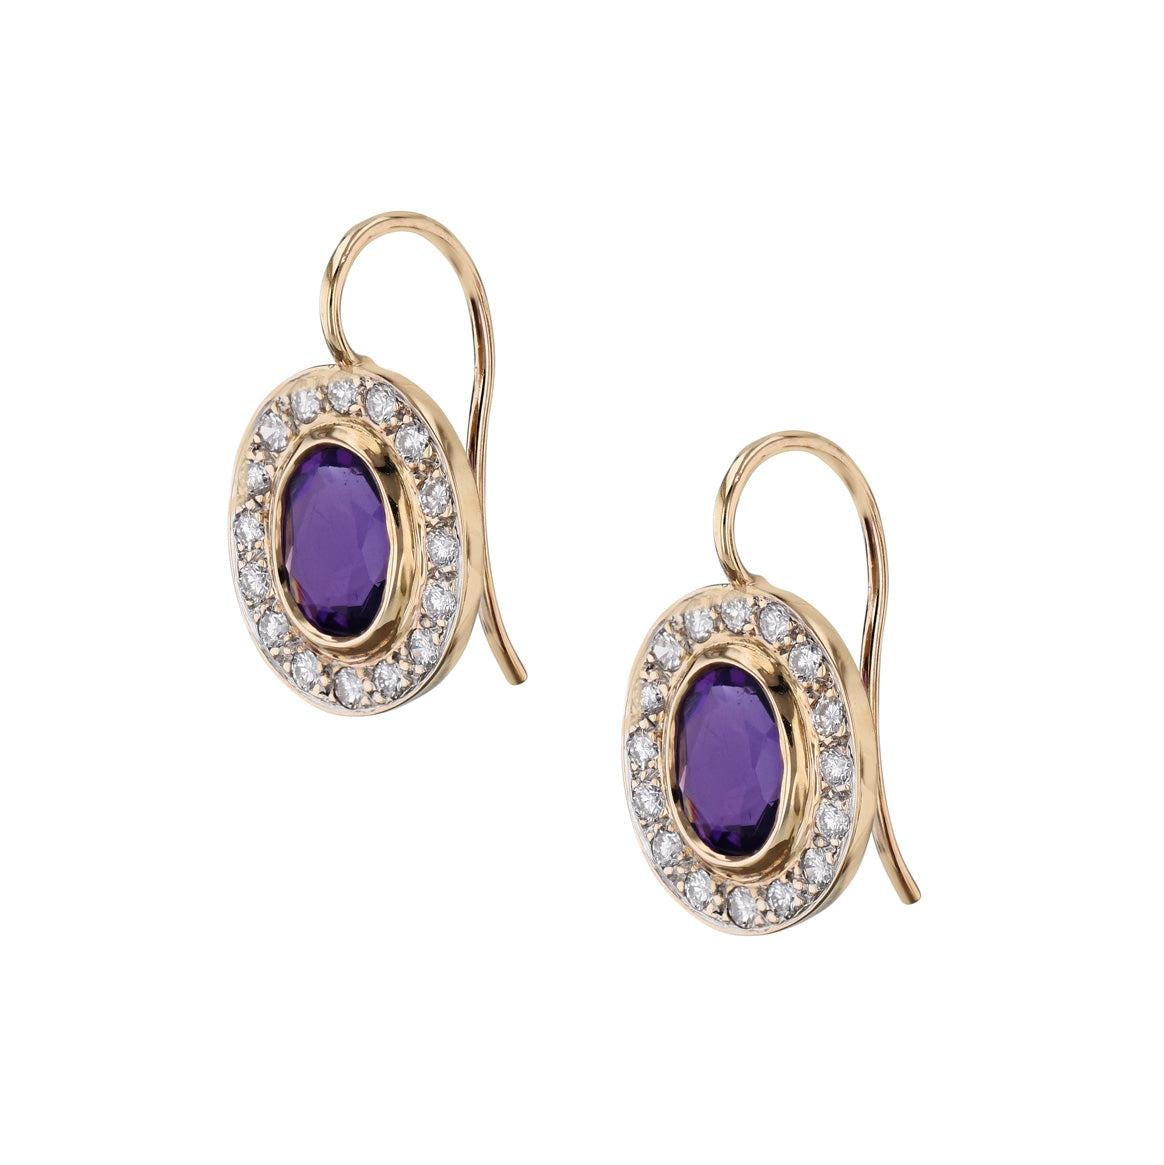 Glimmering with character, these dazzling Amethyst Pave Diamond Estate Earrings will turn heads! Set in 14kt yellow gold, the pave diamonds elegantly accentuate the amethyst stones. A gorgeous earring set from the H&H Estate & Vintage Collection,